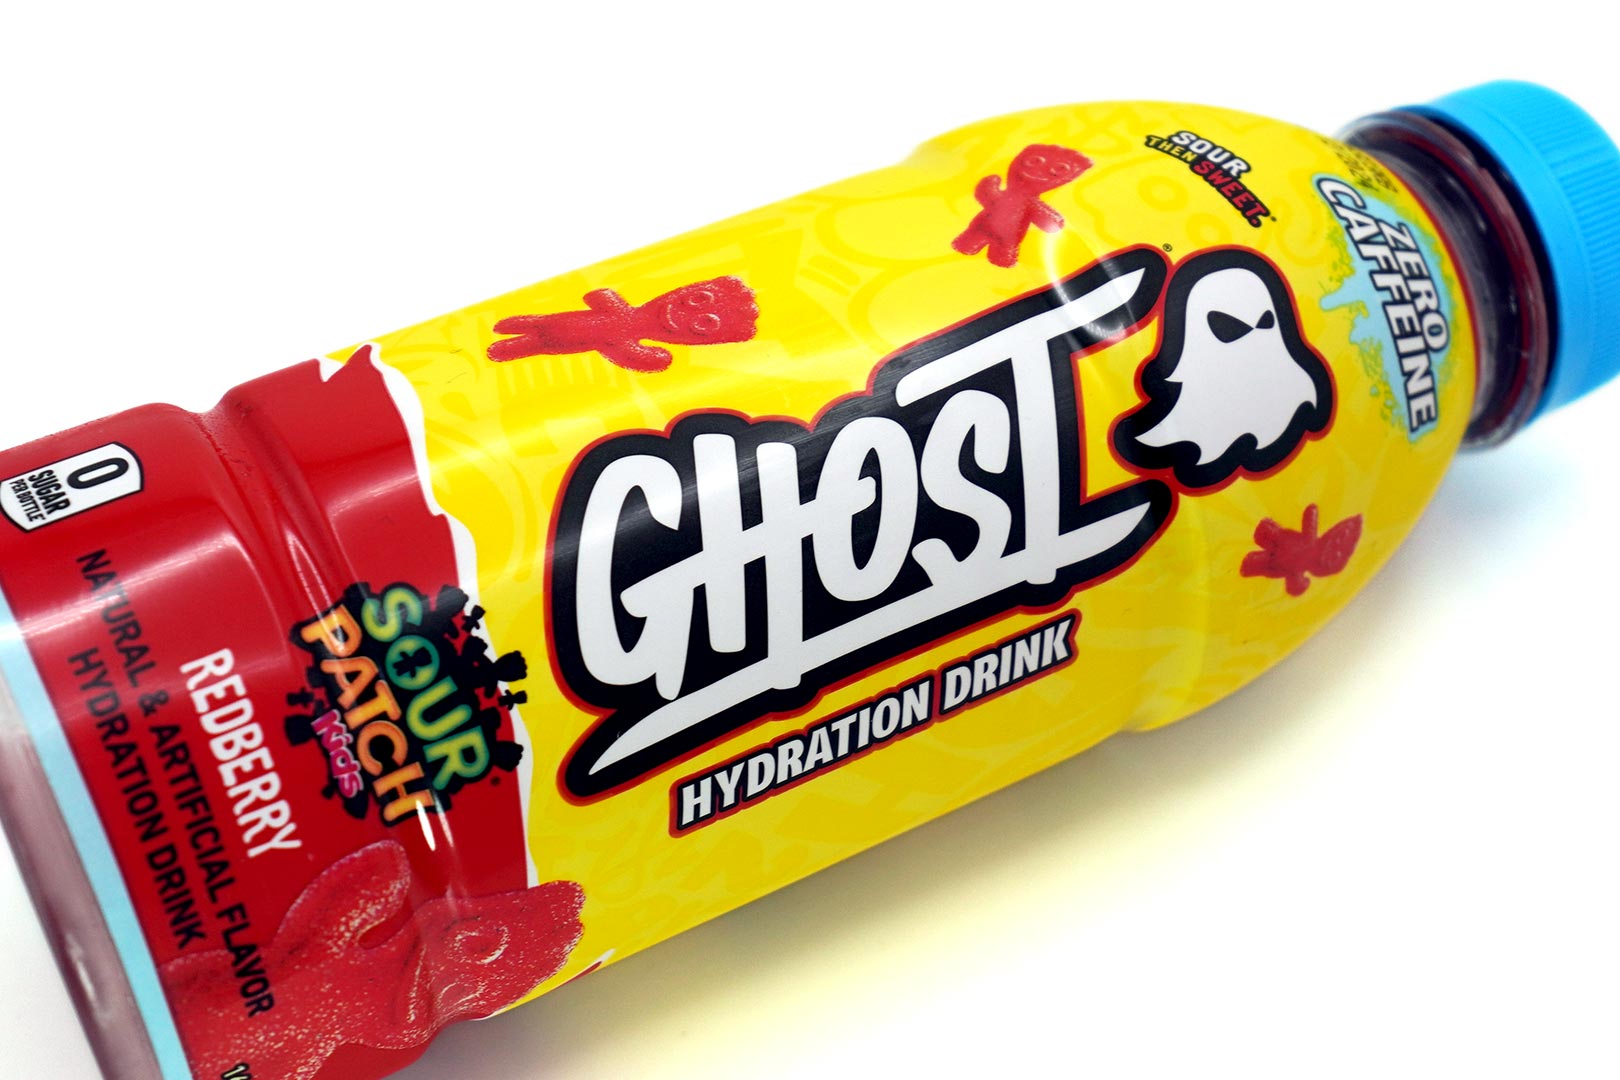 Ghost Hydration Drink Review